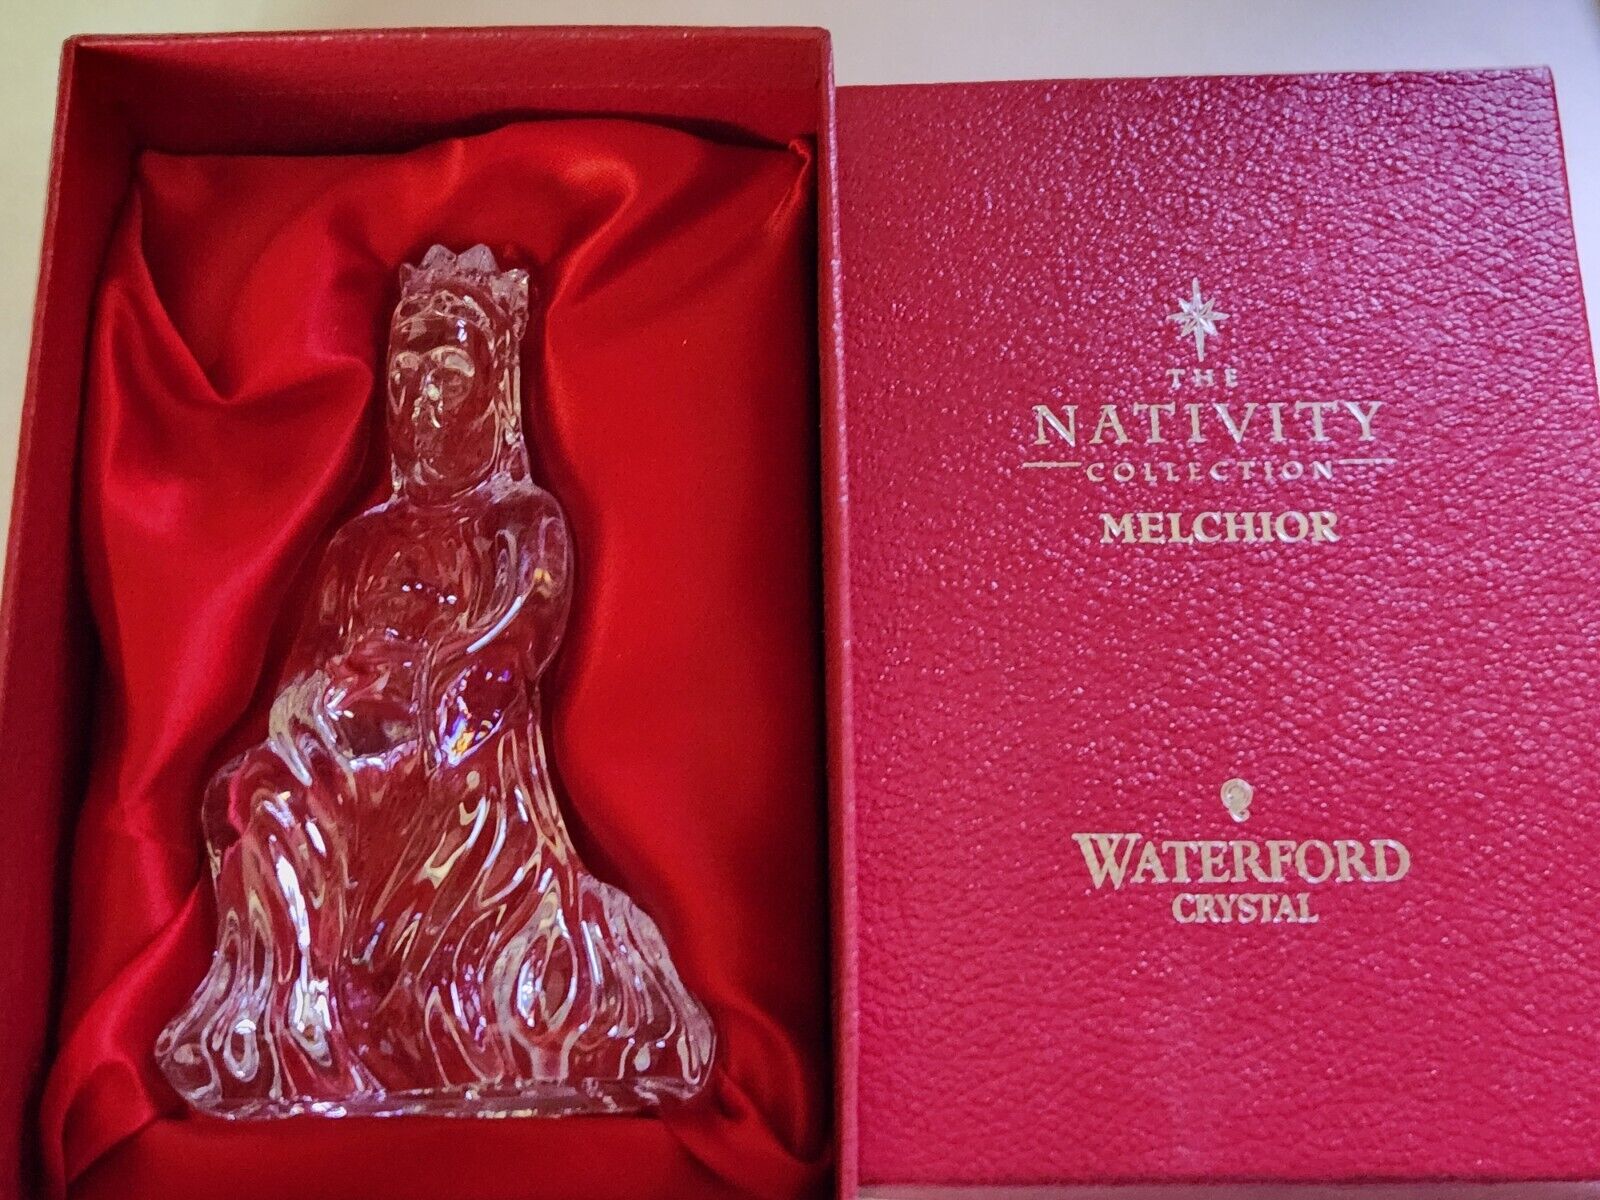 Waterford Crystal Nativity Collection - Melchior Wisemen Figurine ~ MINT in BOX